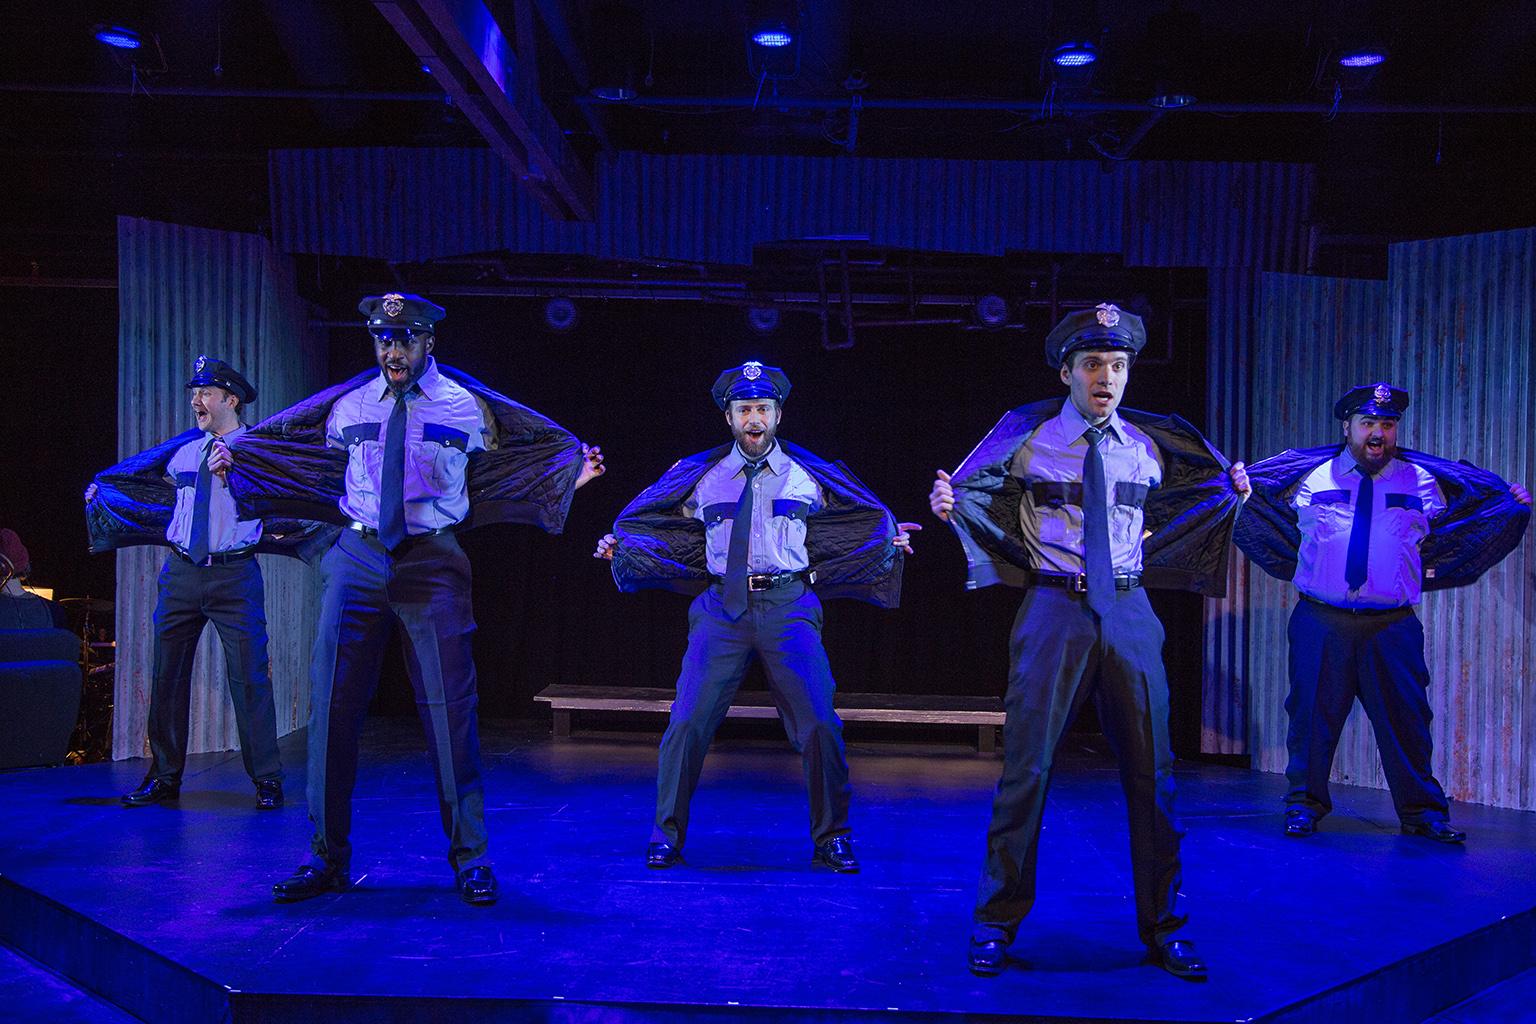 From left: Jonathan Schwart, Marc Prince, Neil Stratman, Joe Giovannetti and Nick Druzbanski in “The Full Monty” at Theo Ubique Cabaret Theatre. (Photo by Austin D. Oie)